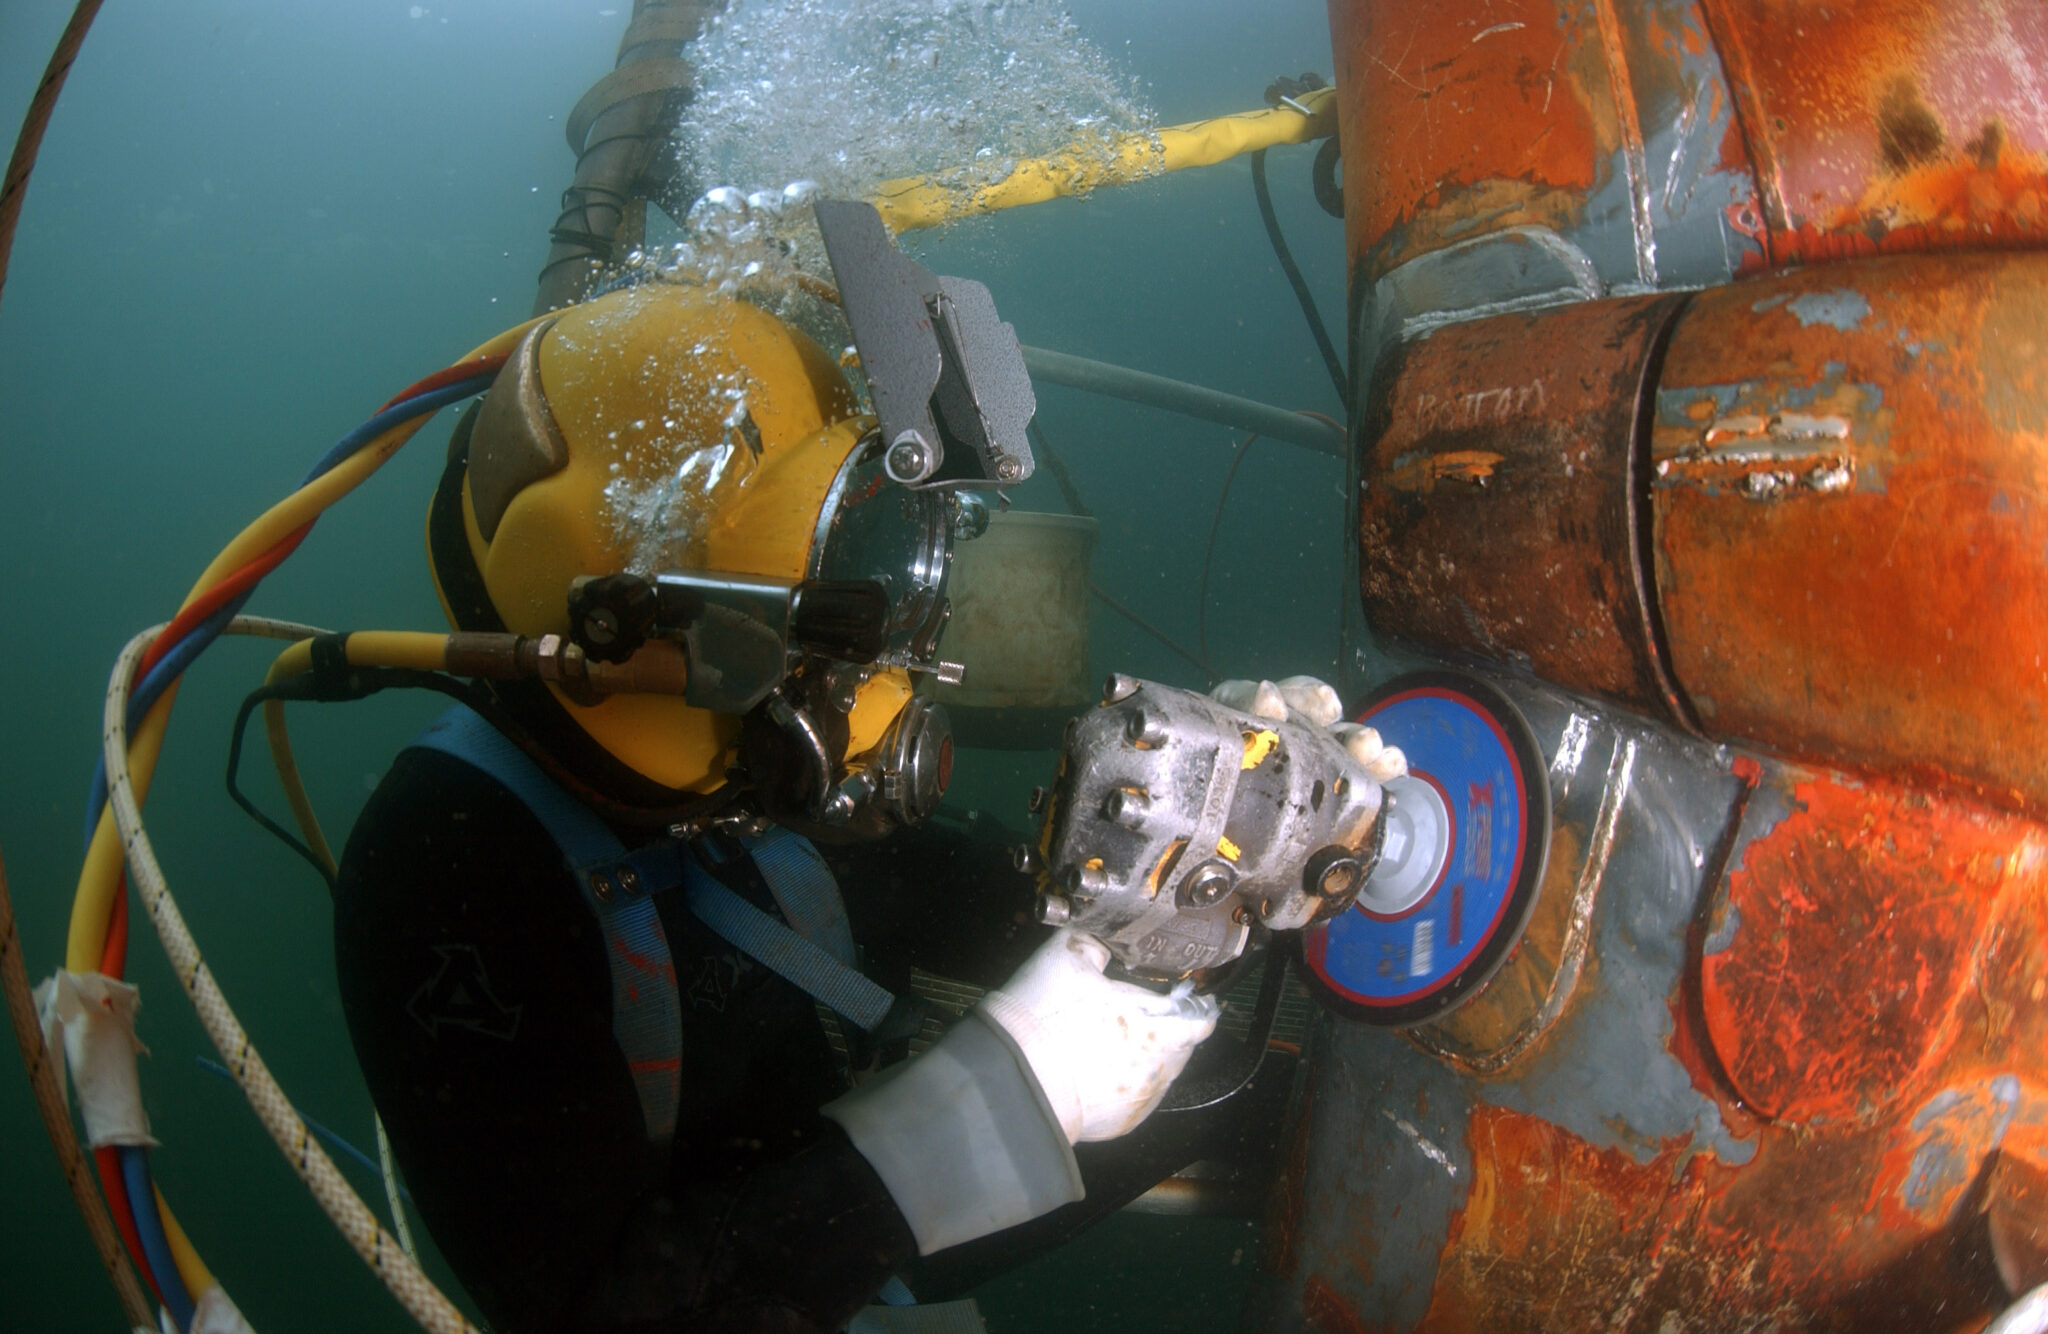 A commercial navy diver doing underwater maintenance, one of the things scuba divers can do if they have the right training